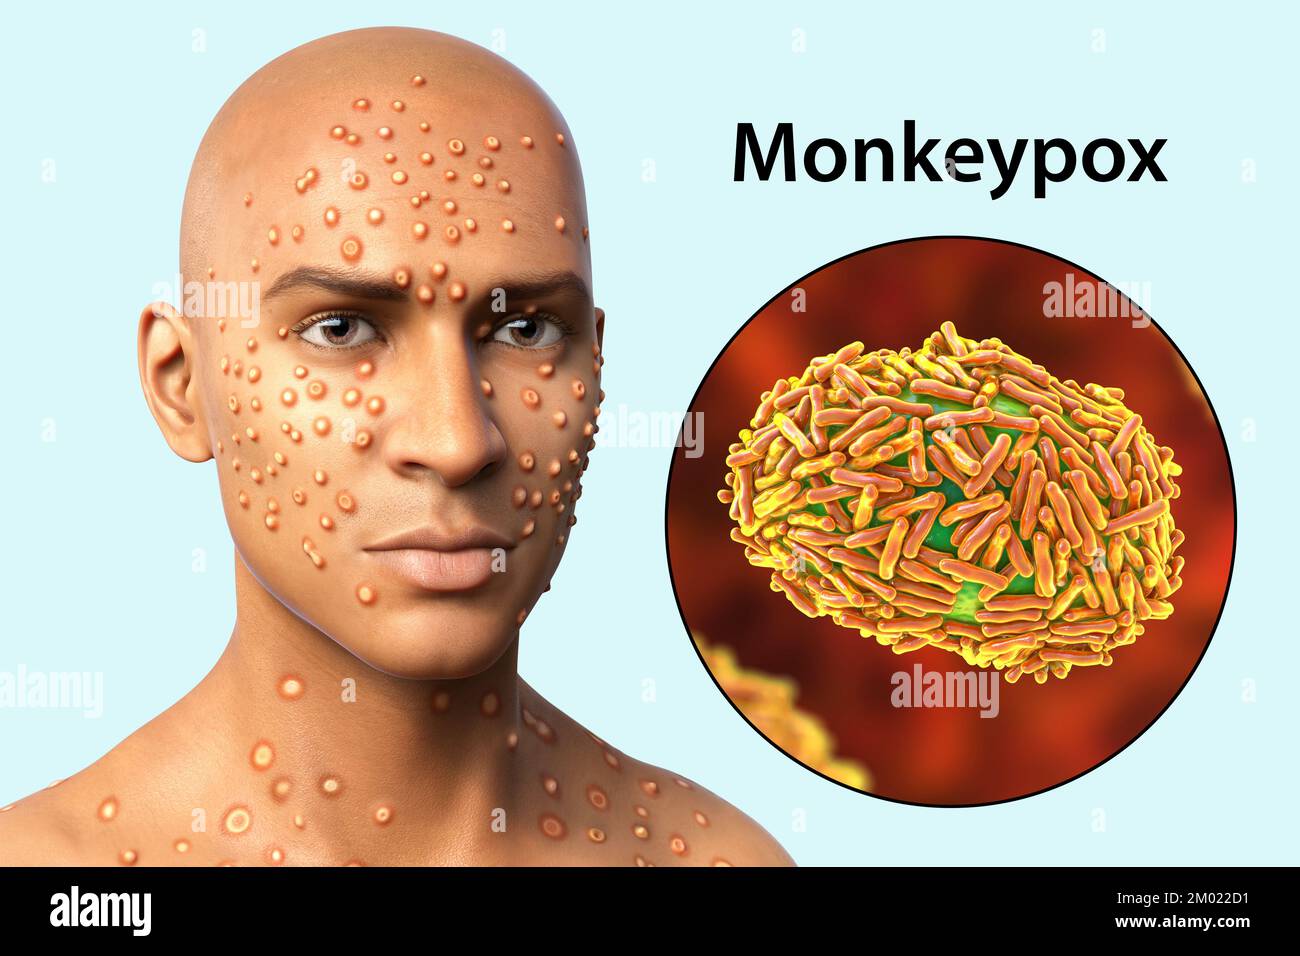 Patient with monkeypox infection, computer illustration. Monkeypox is a zoonotic virus from the Poxviridae family that causes monkeypox, a pox-like di Stock Photo